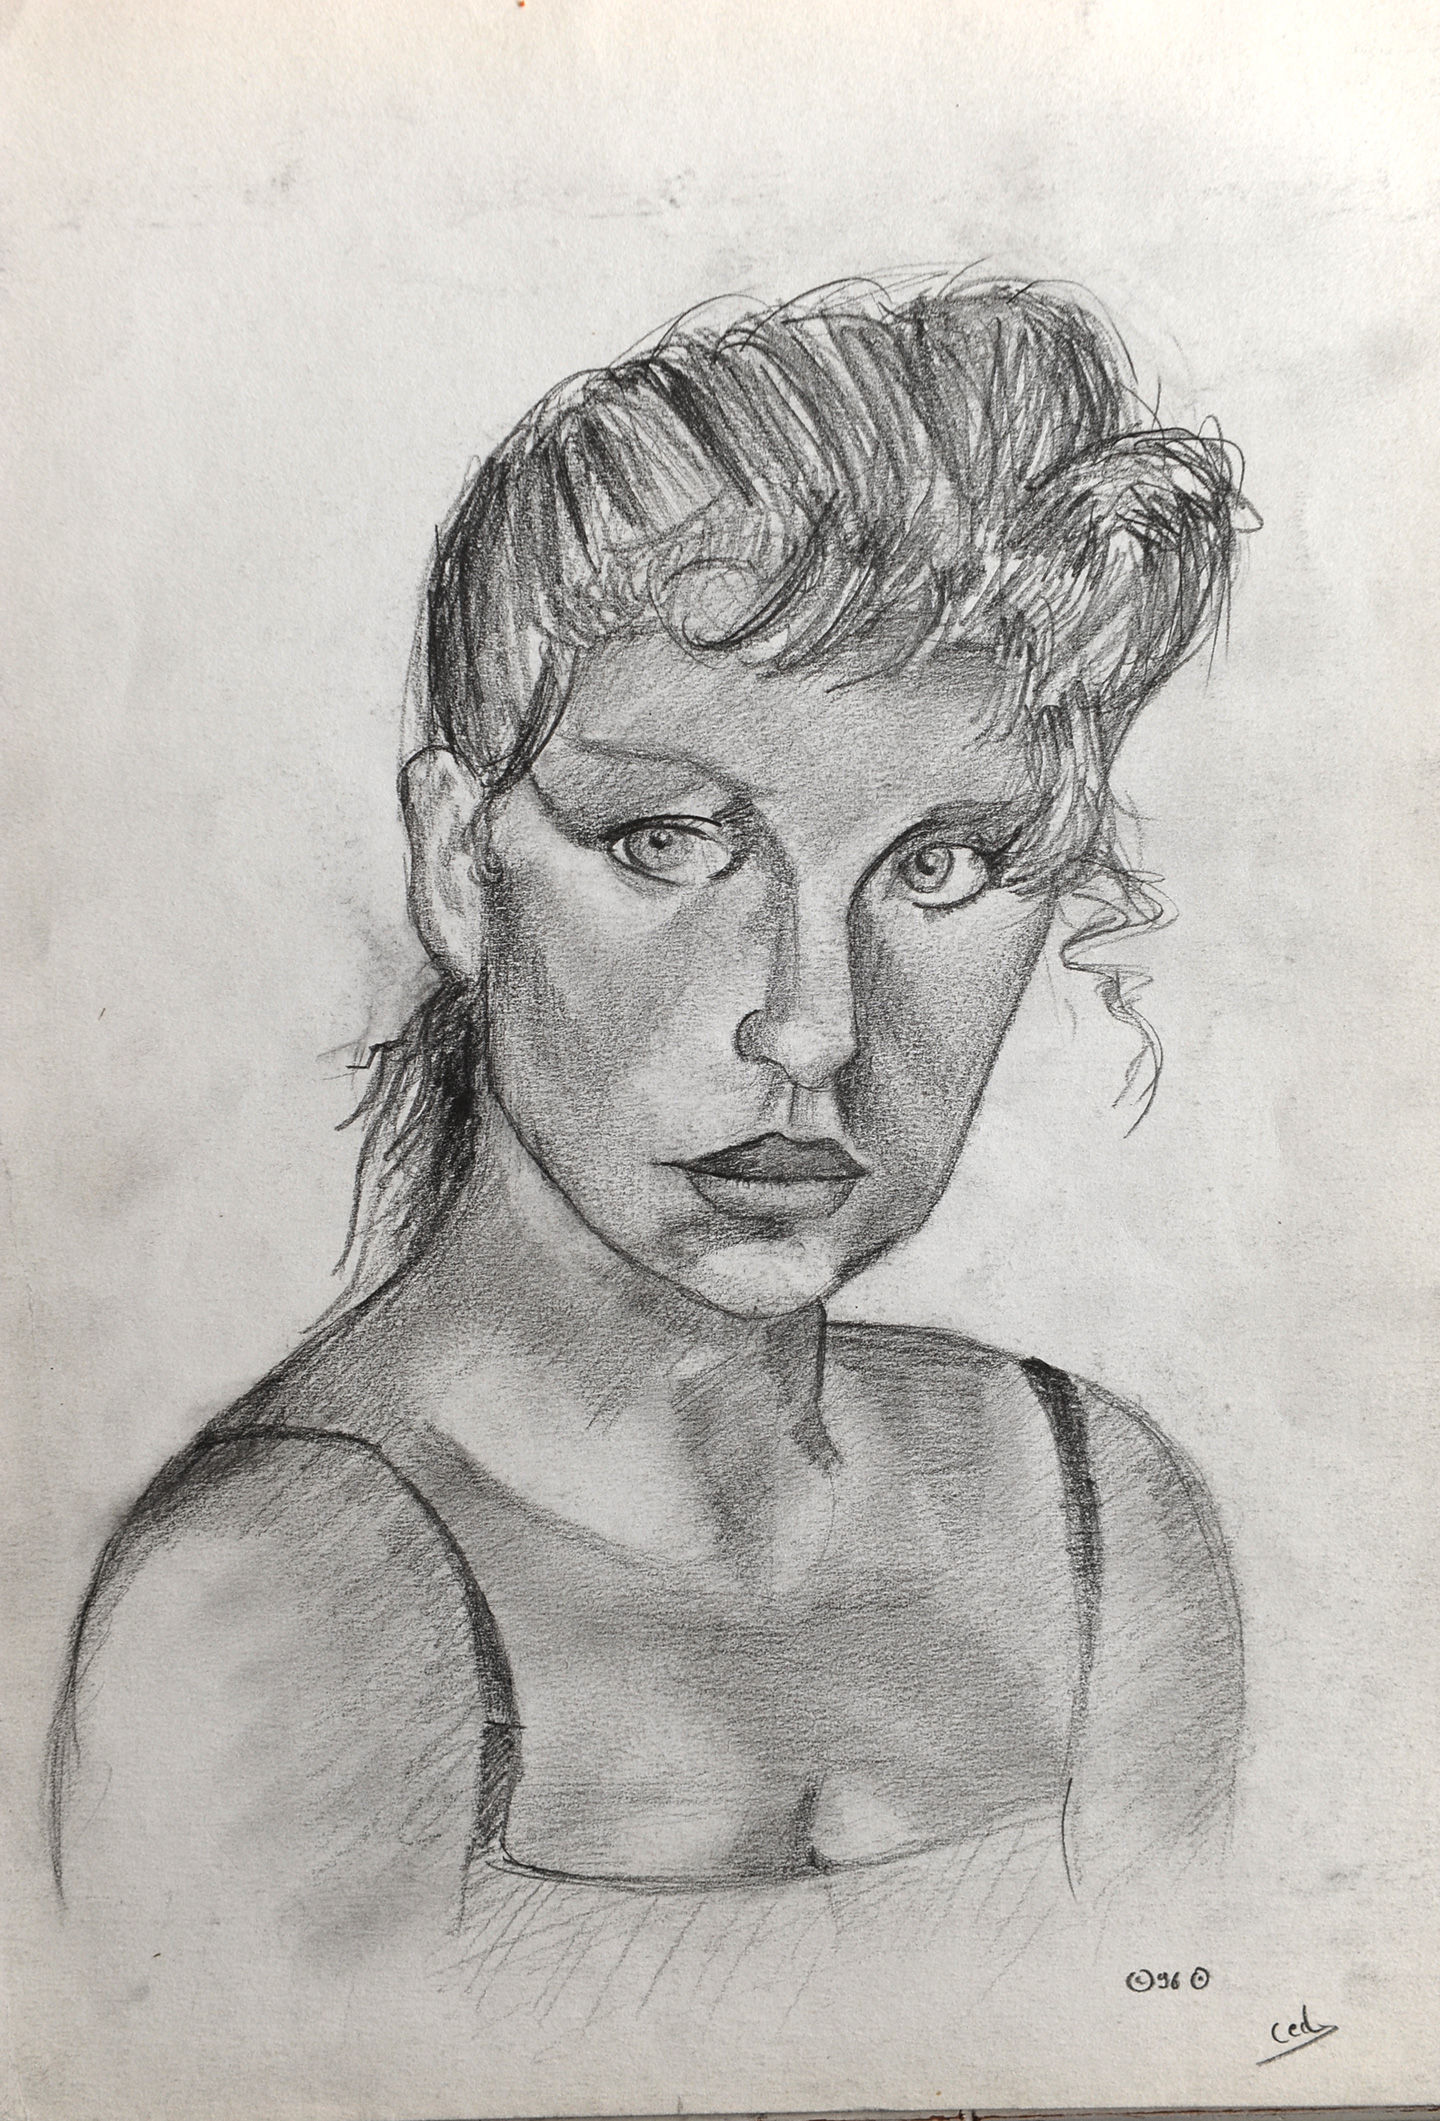 A black and white portrait drawing